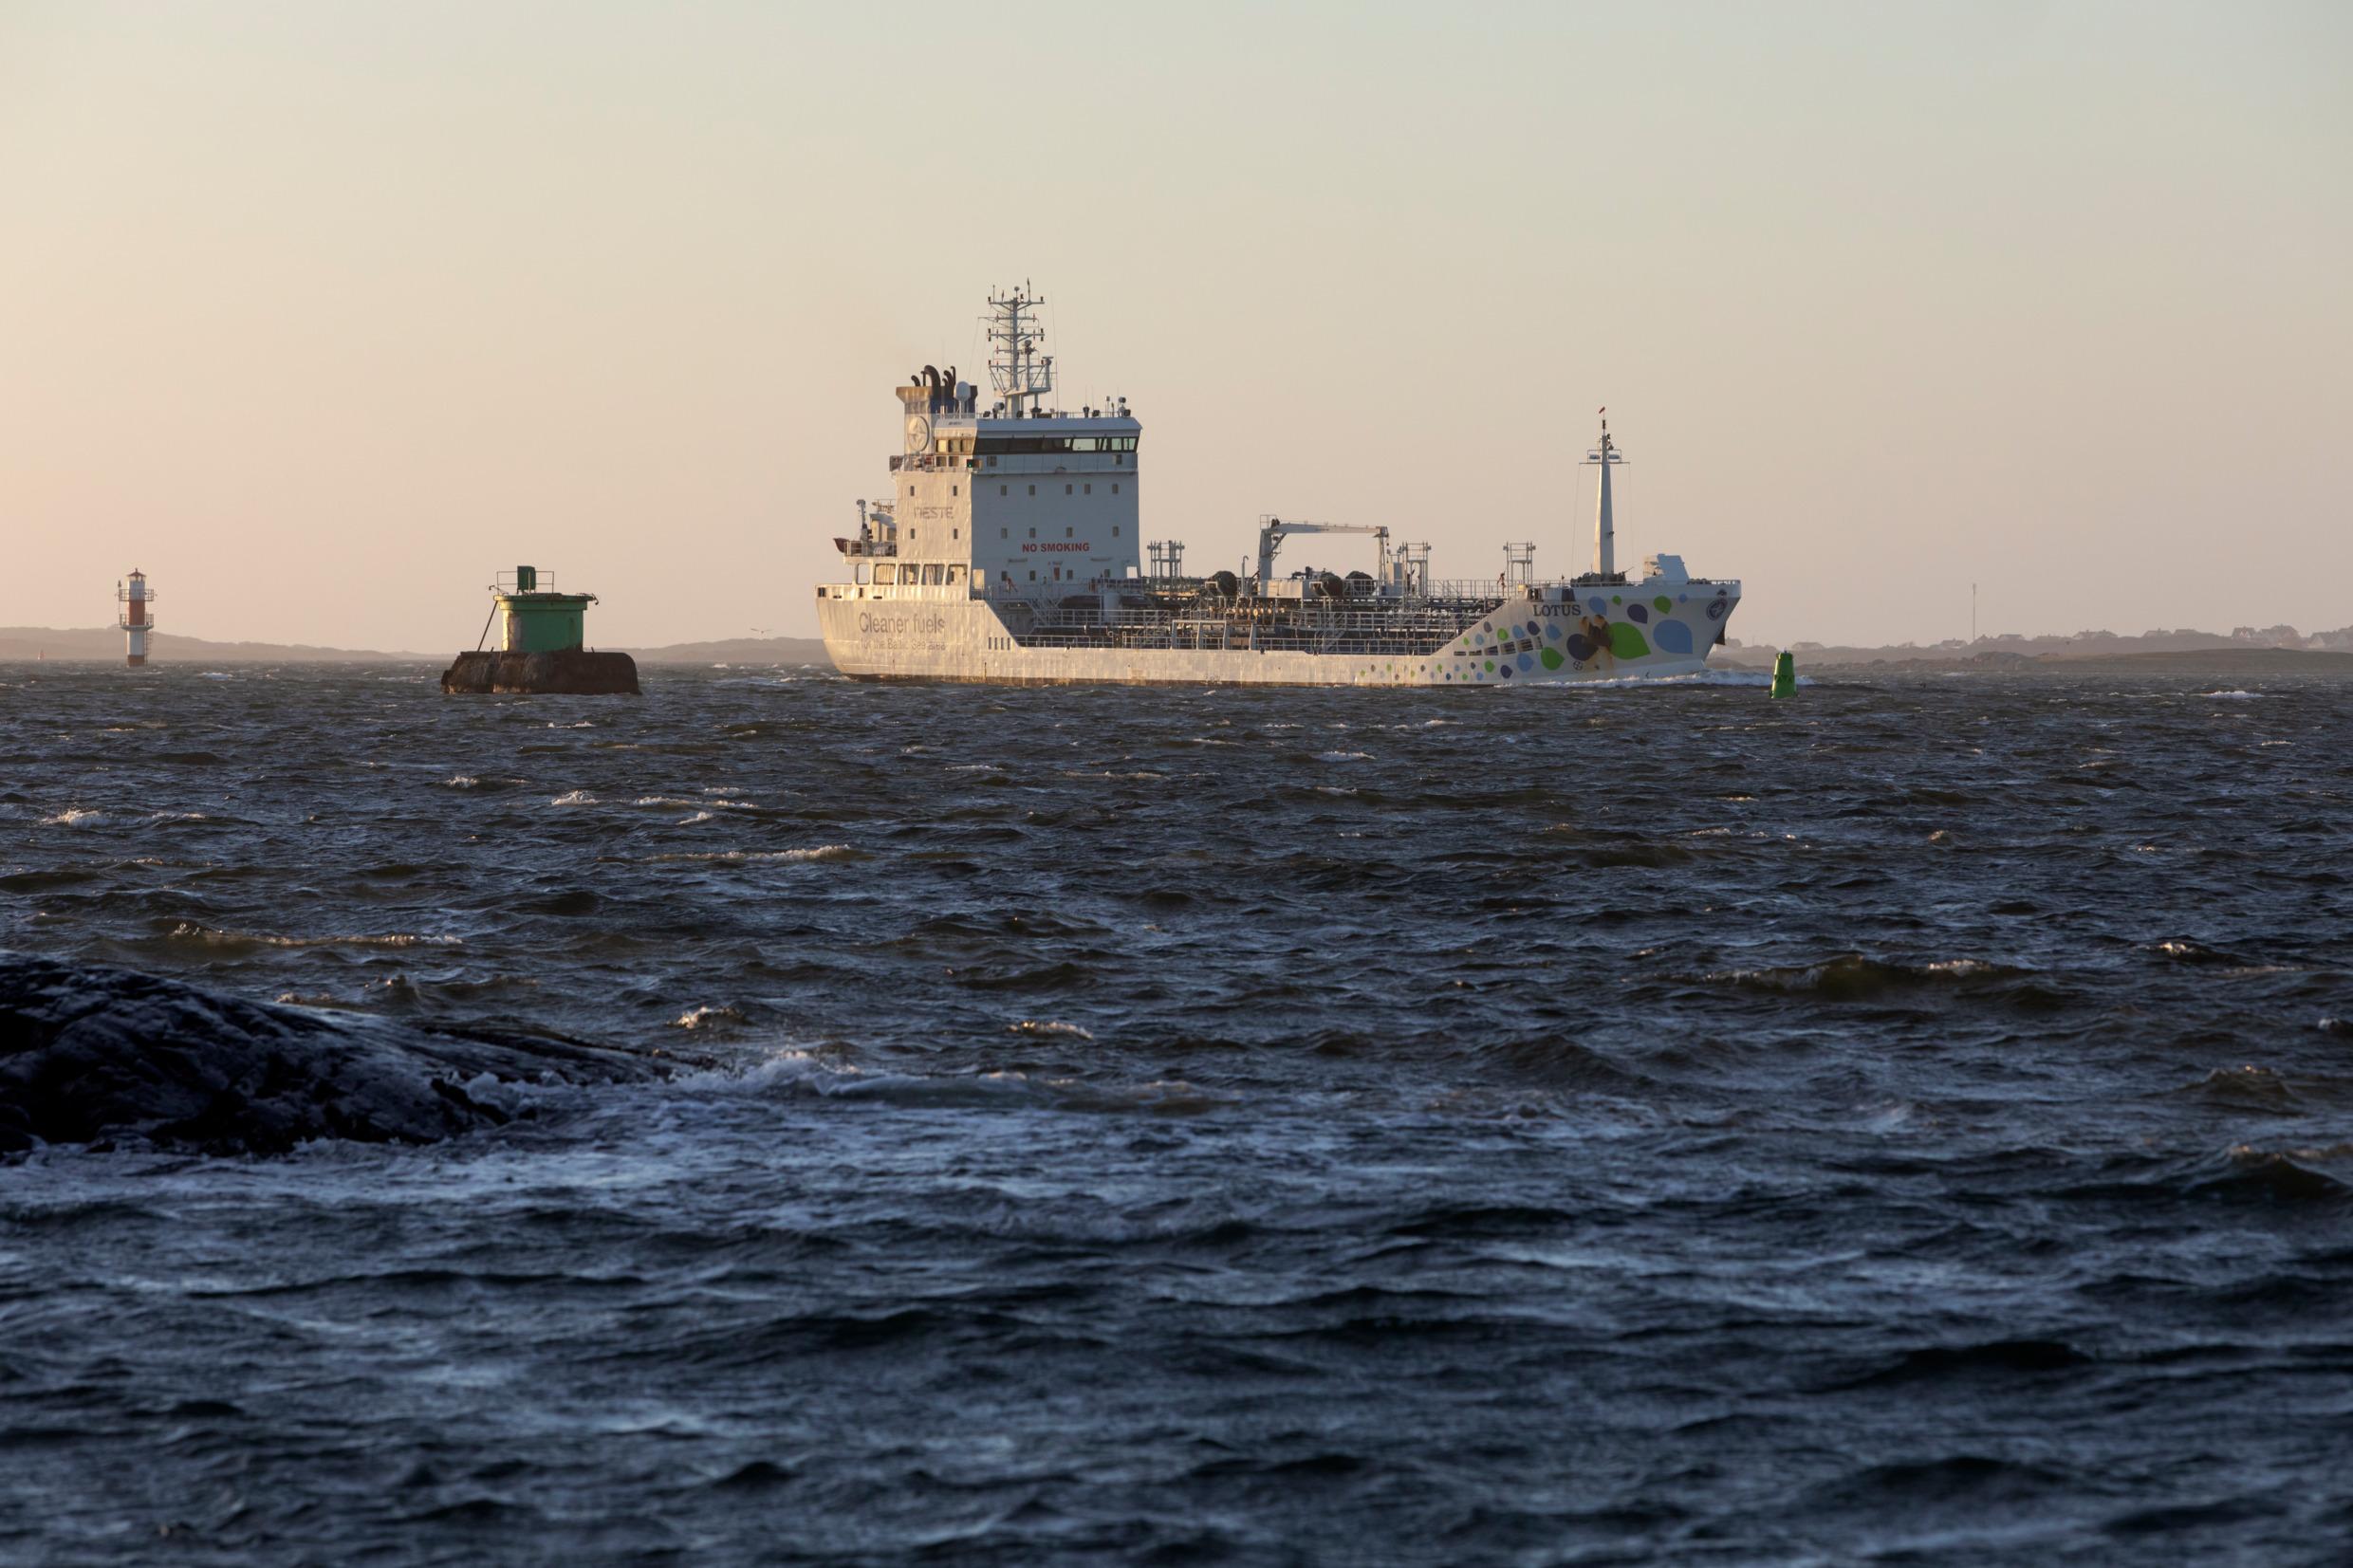 A tanker out on the ocean.